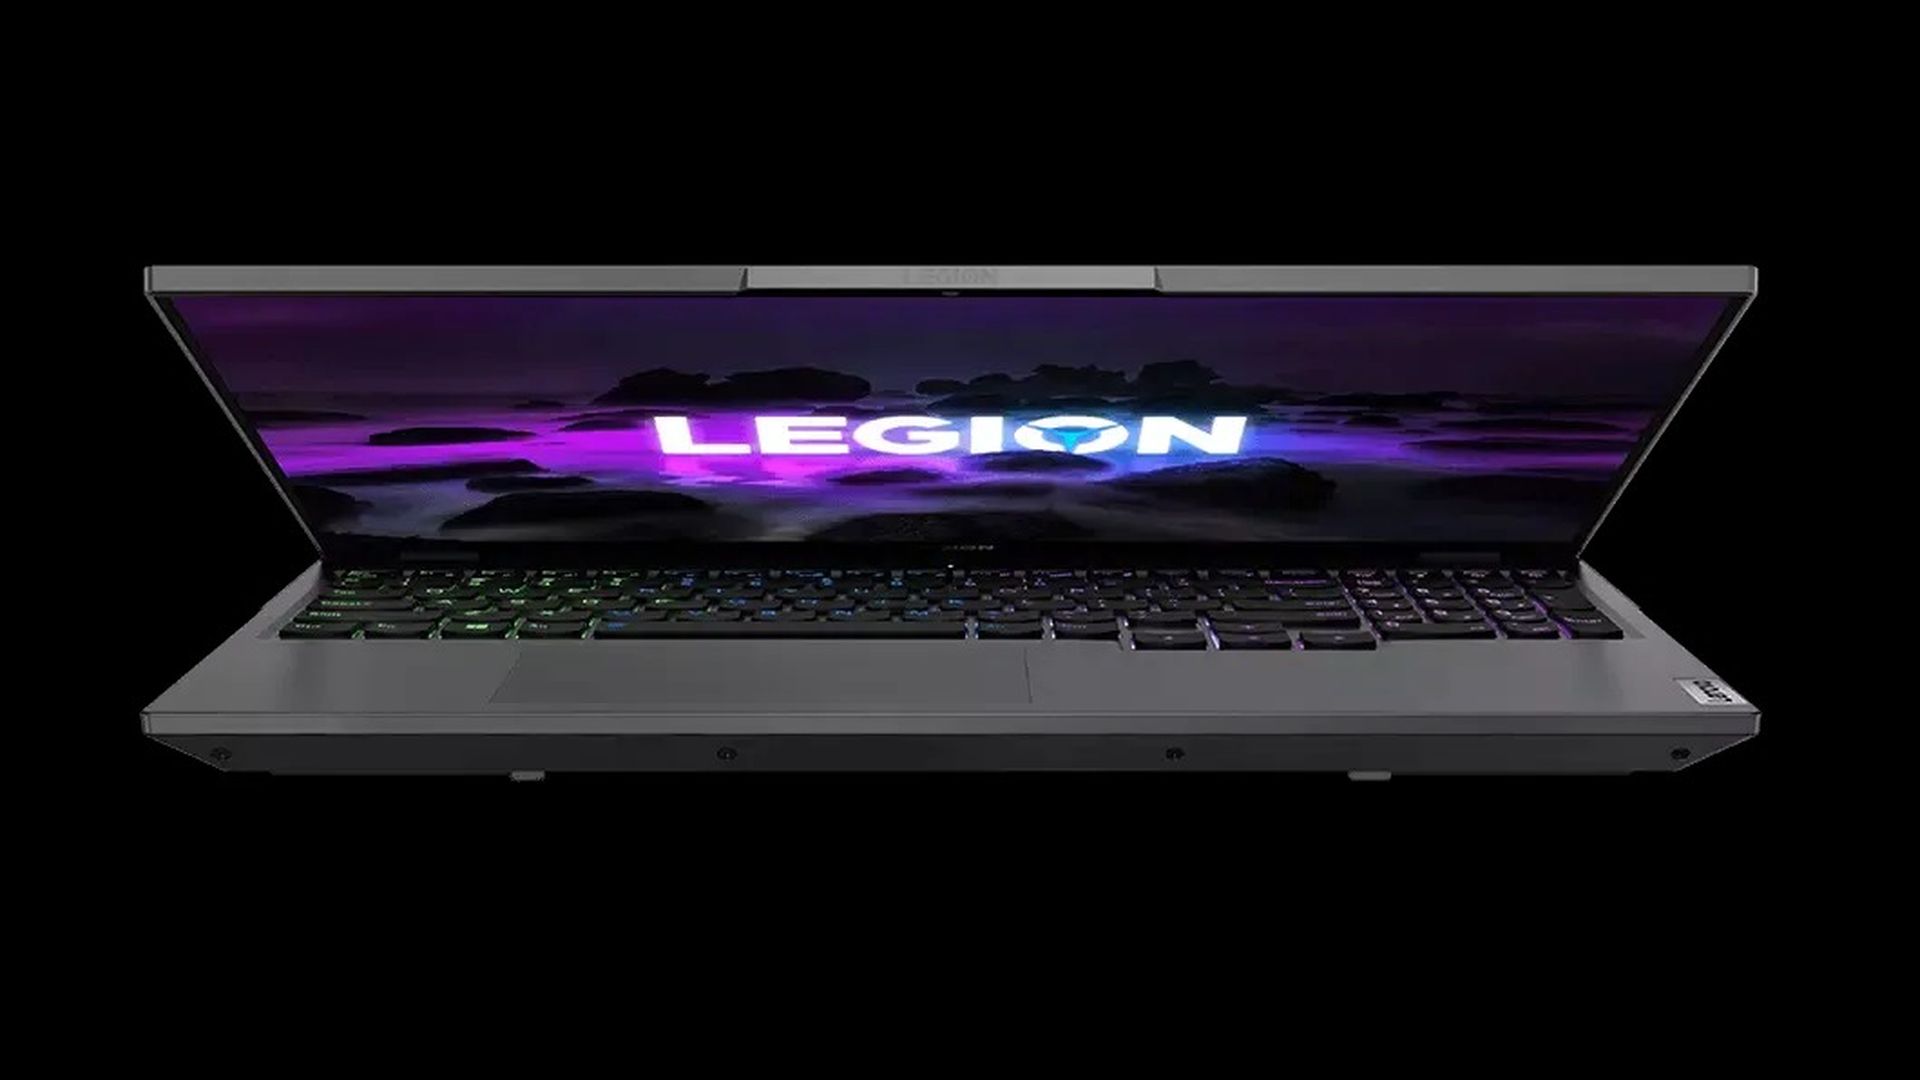 Today, we are going to take a look at the Lenovo Legion 5 Pro, its specs, price, and all there is to know about this gaming laptop when compared to its rivals.